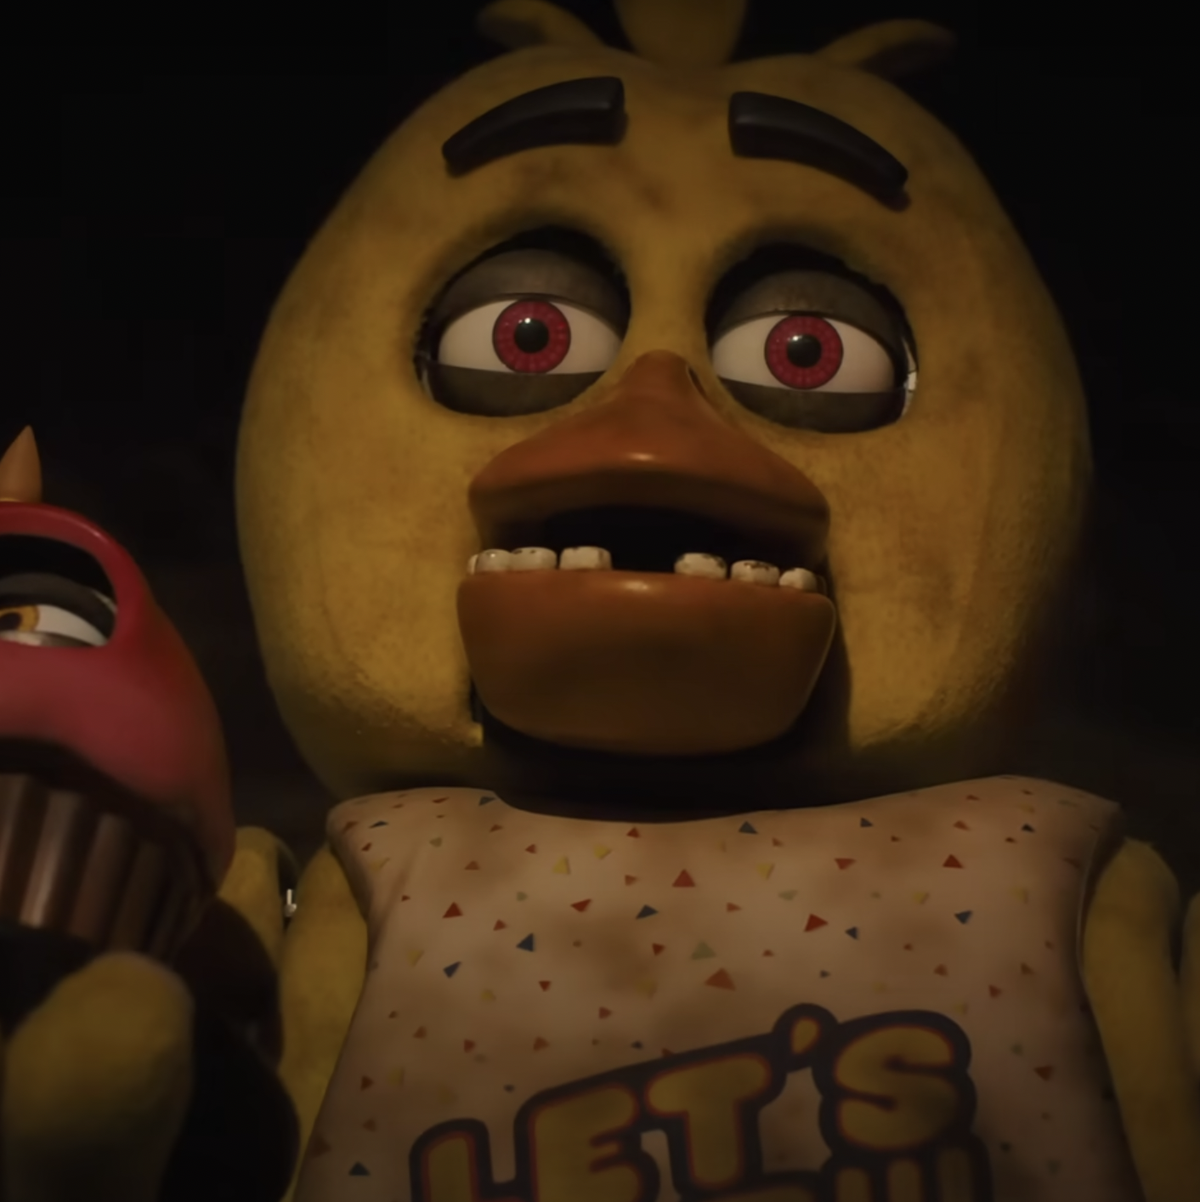 Five Nights at Freddy's 2': Everything We Know So Far